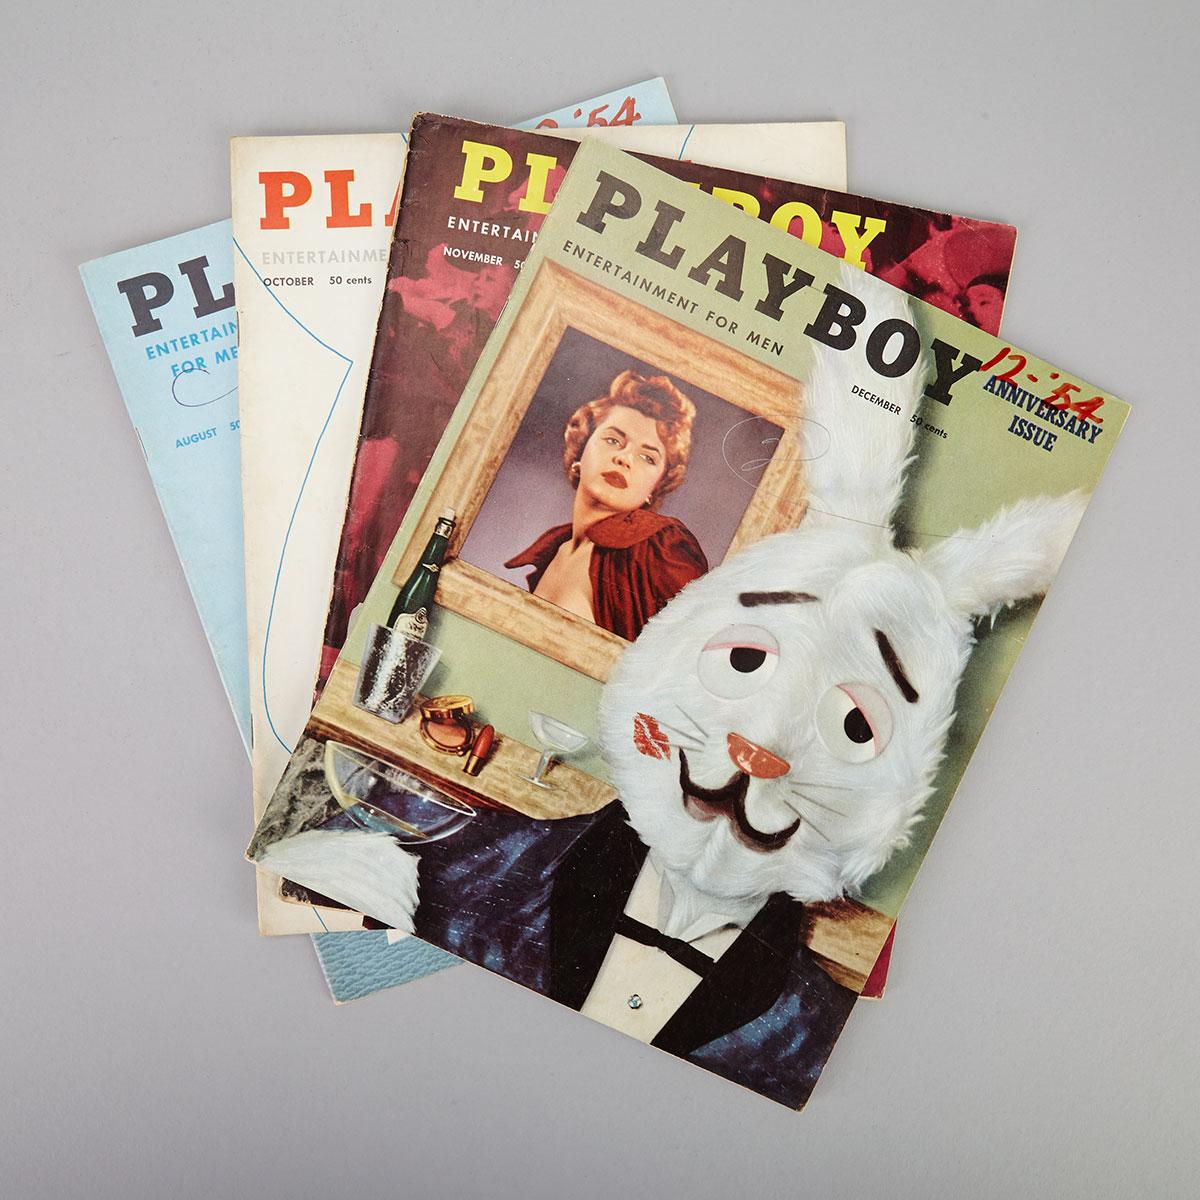 Five Early Issues of Playboy Magazine, February, August, October, November and December, 1954